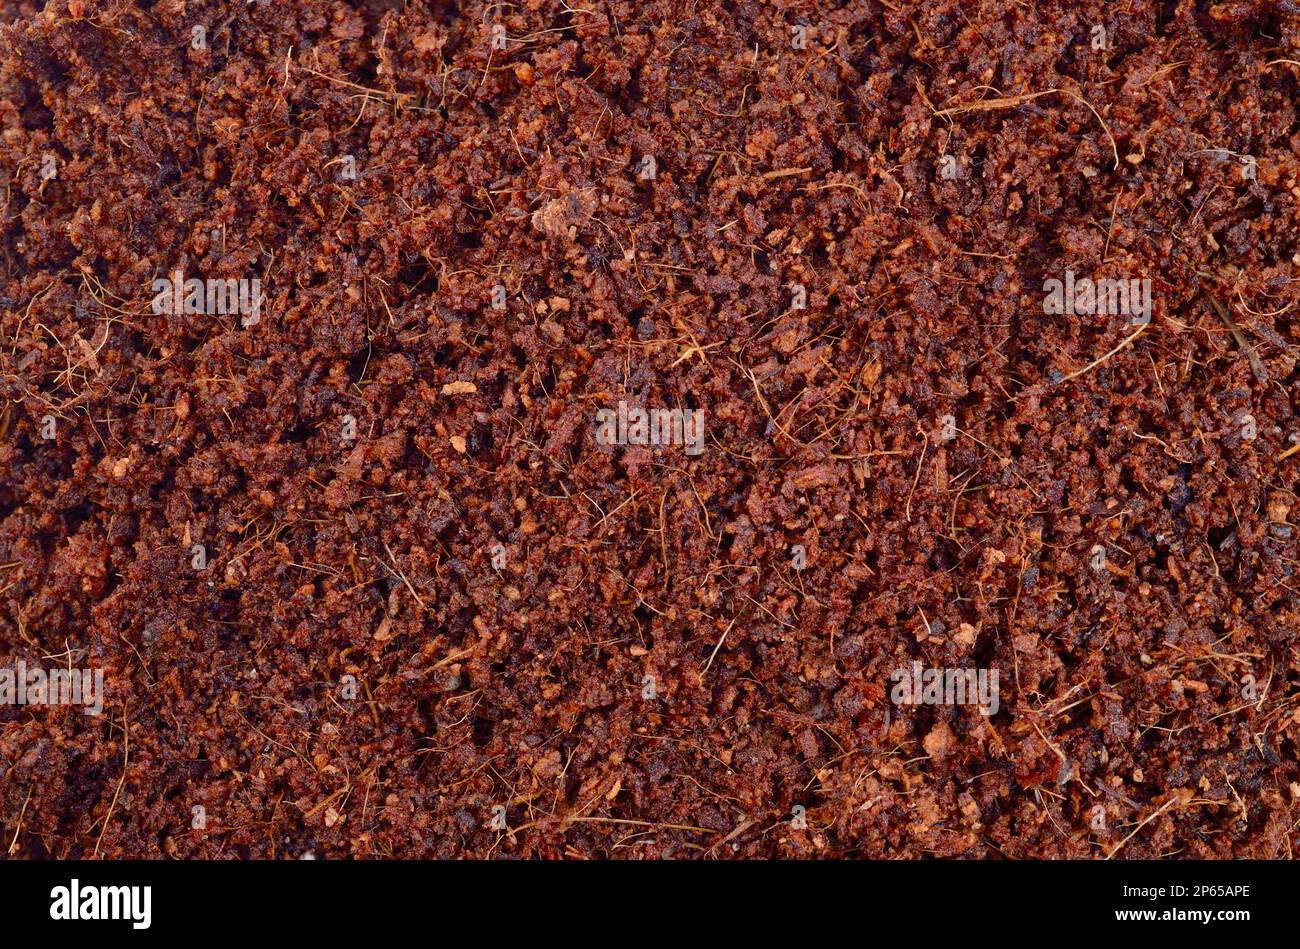 Coconut Coir substrate for for agricultur. Background. Stock Photo